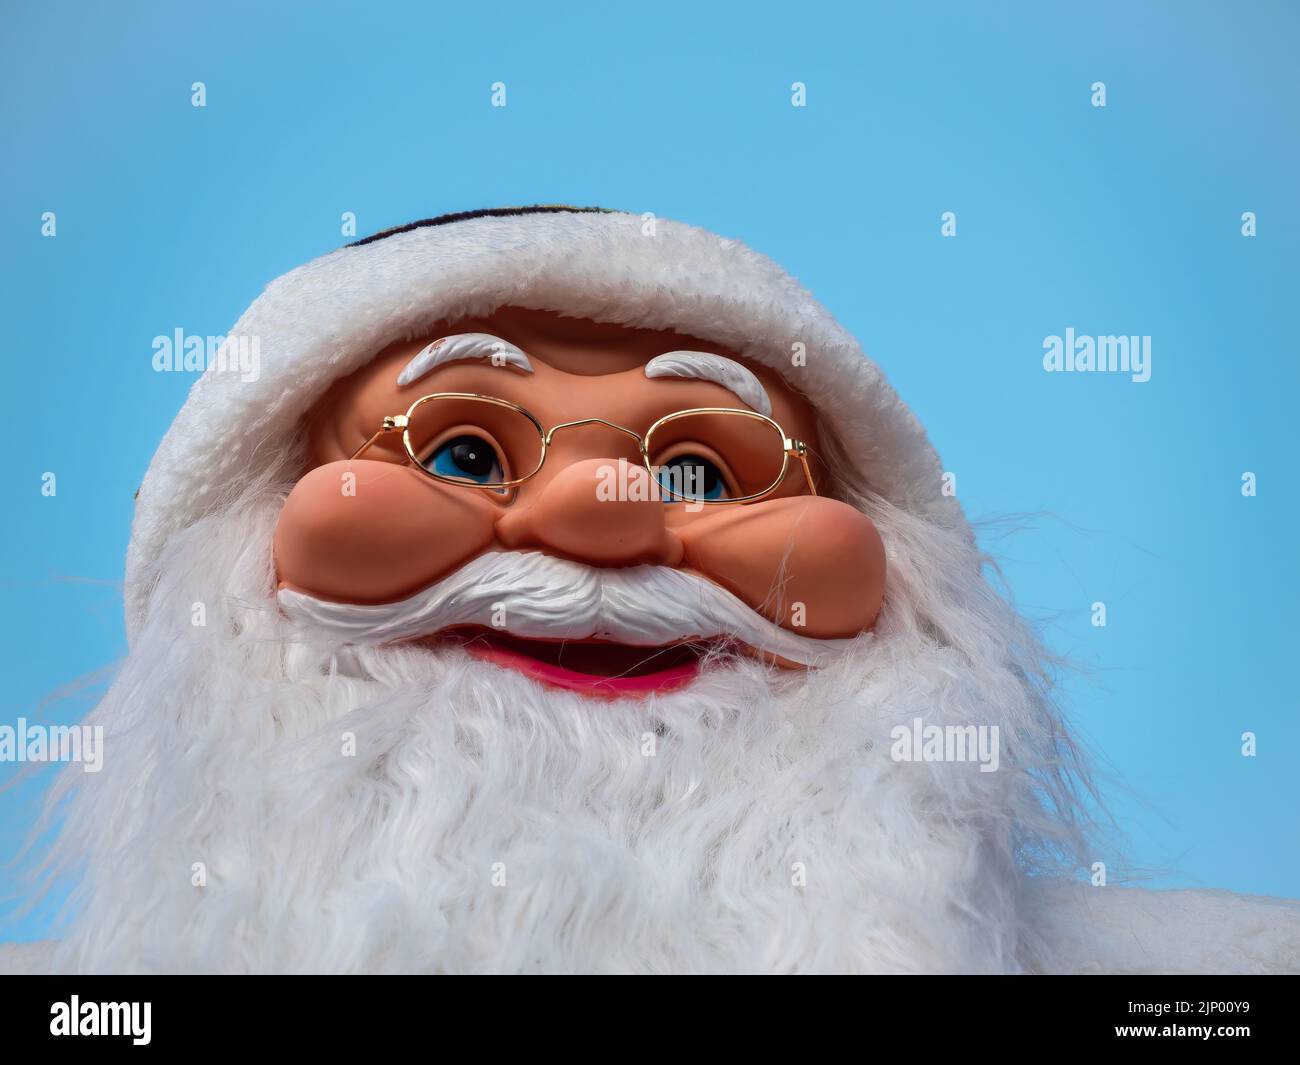 Closeup of the face of a smiling Santa Claus at Advent-Christmas time Stock Photo